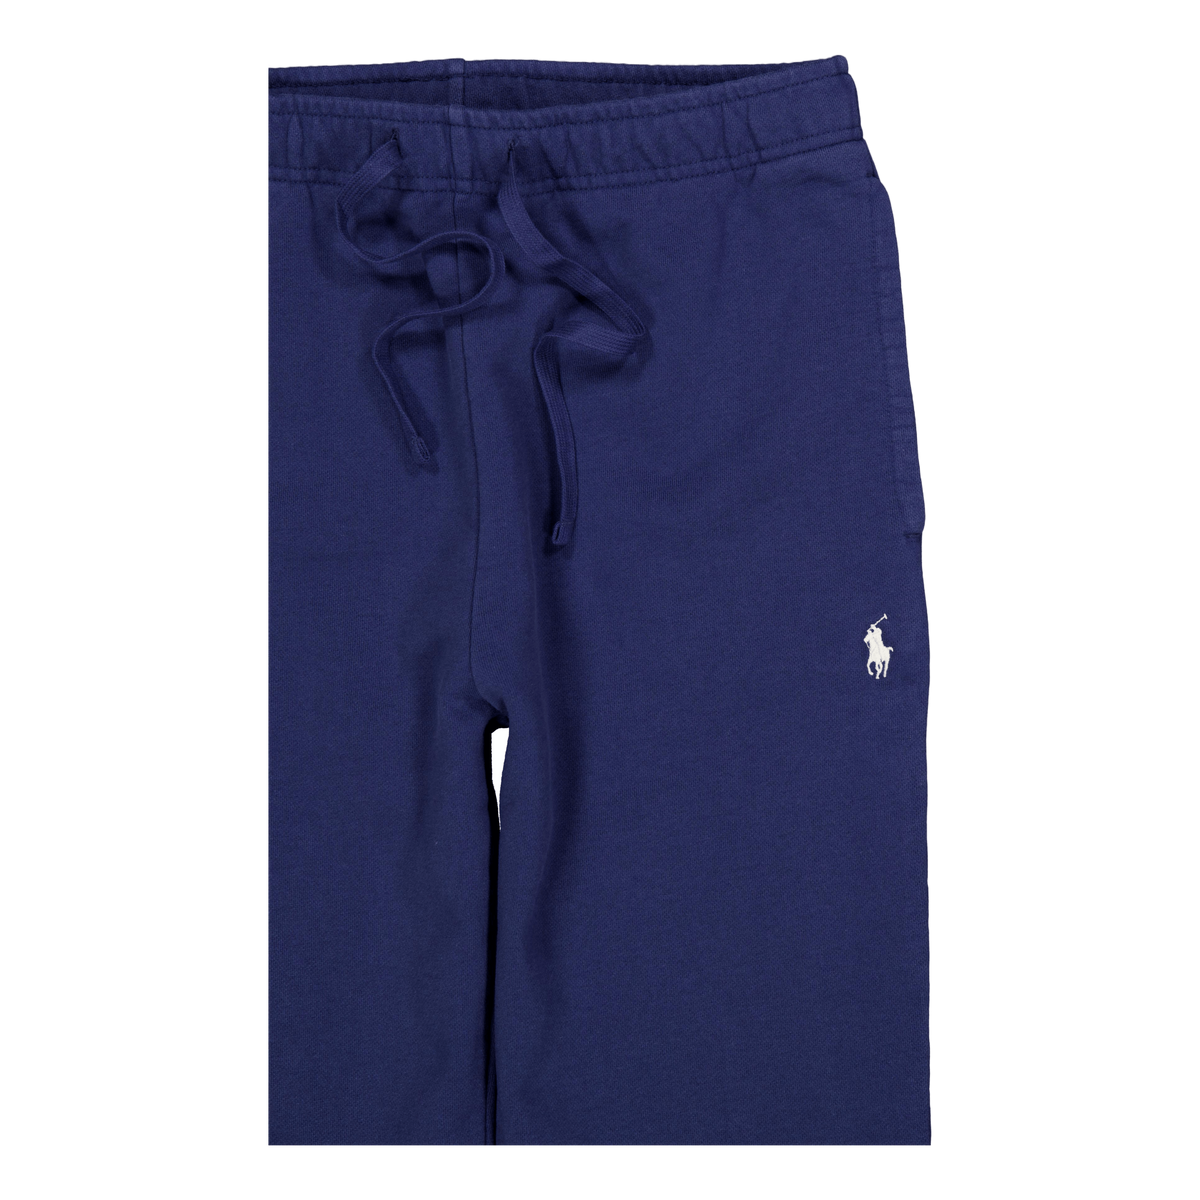 Polo Ralph Lauren Loopback Terry Sweatpant Cruise